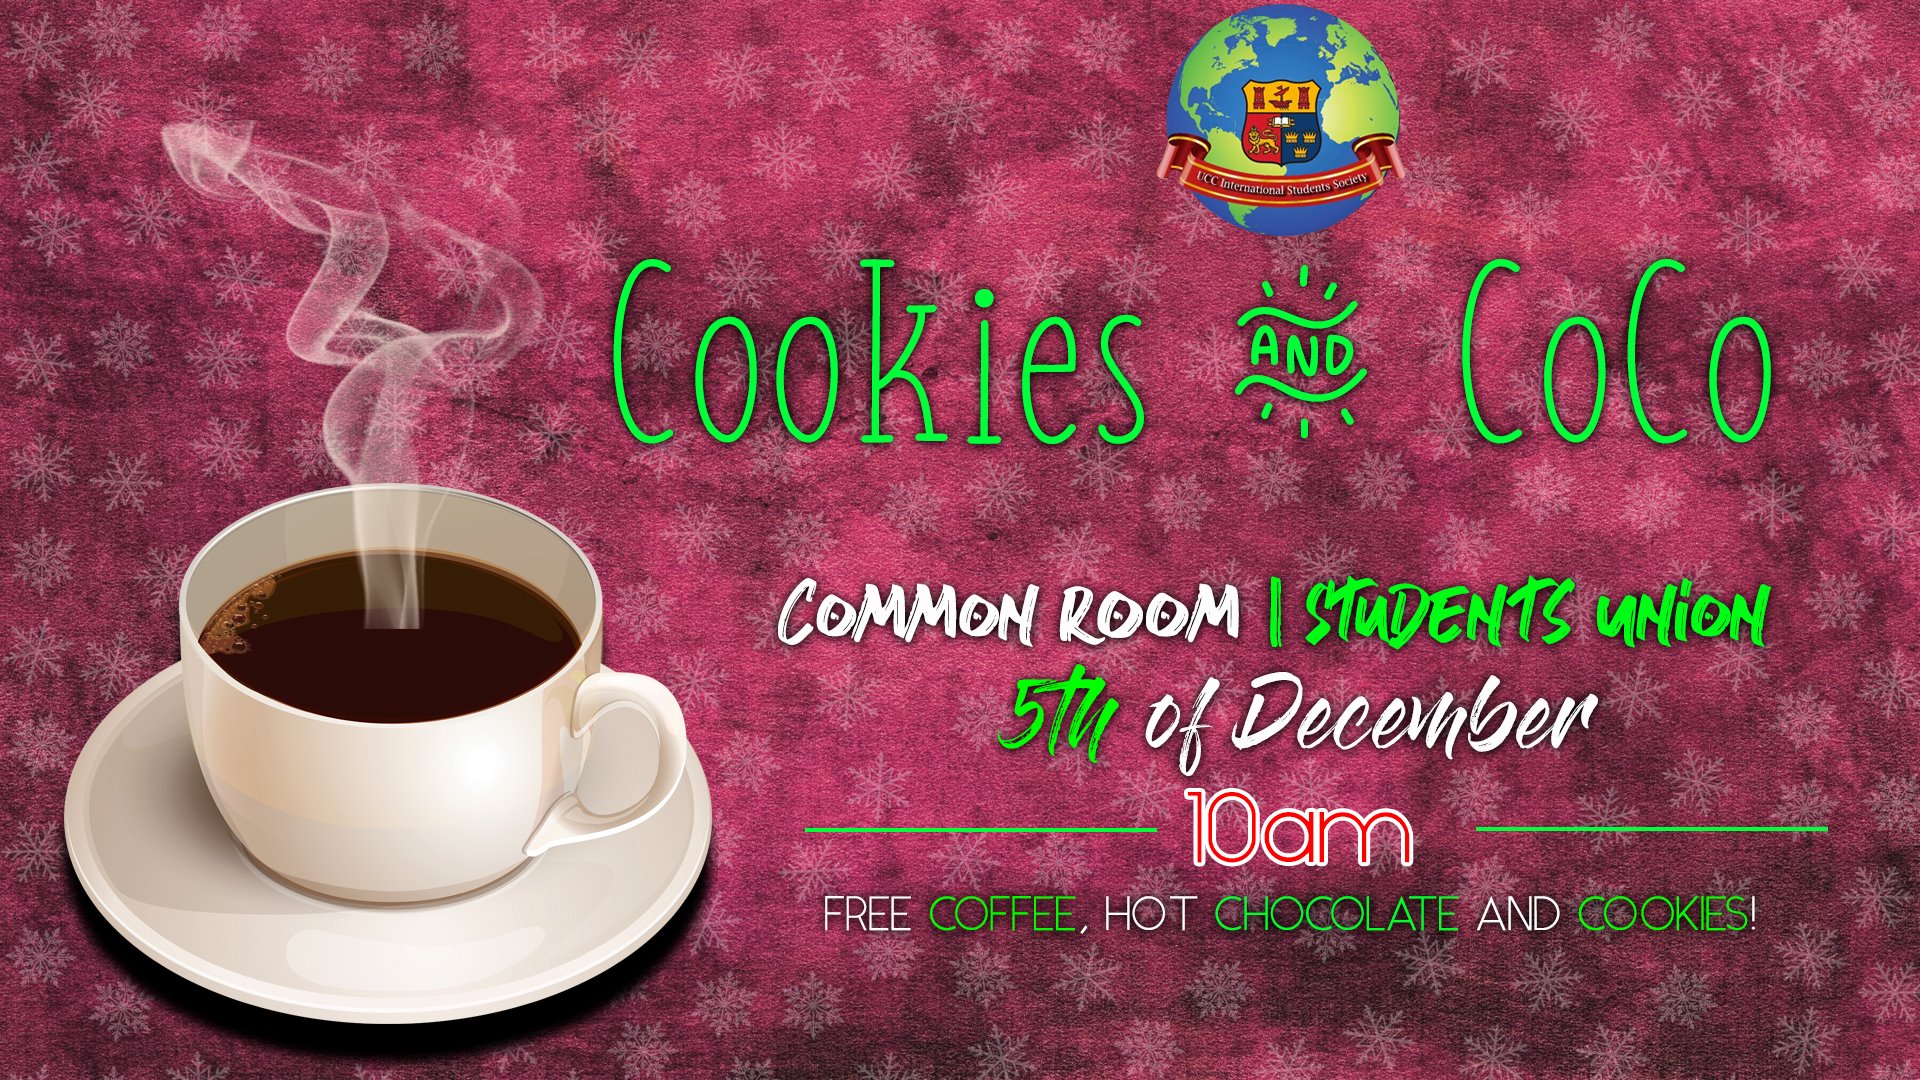 Cookies and Coco- 5th December